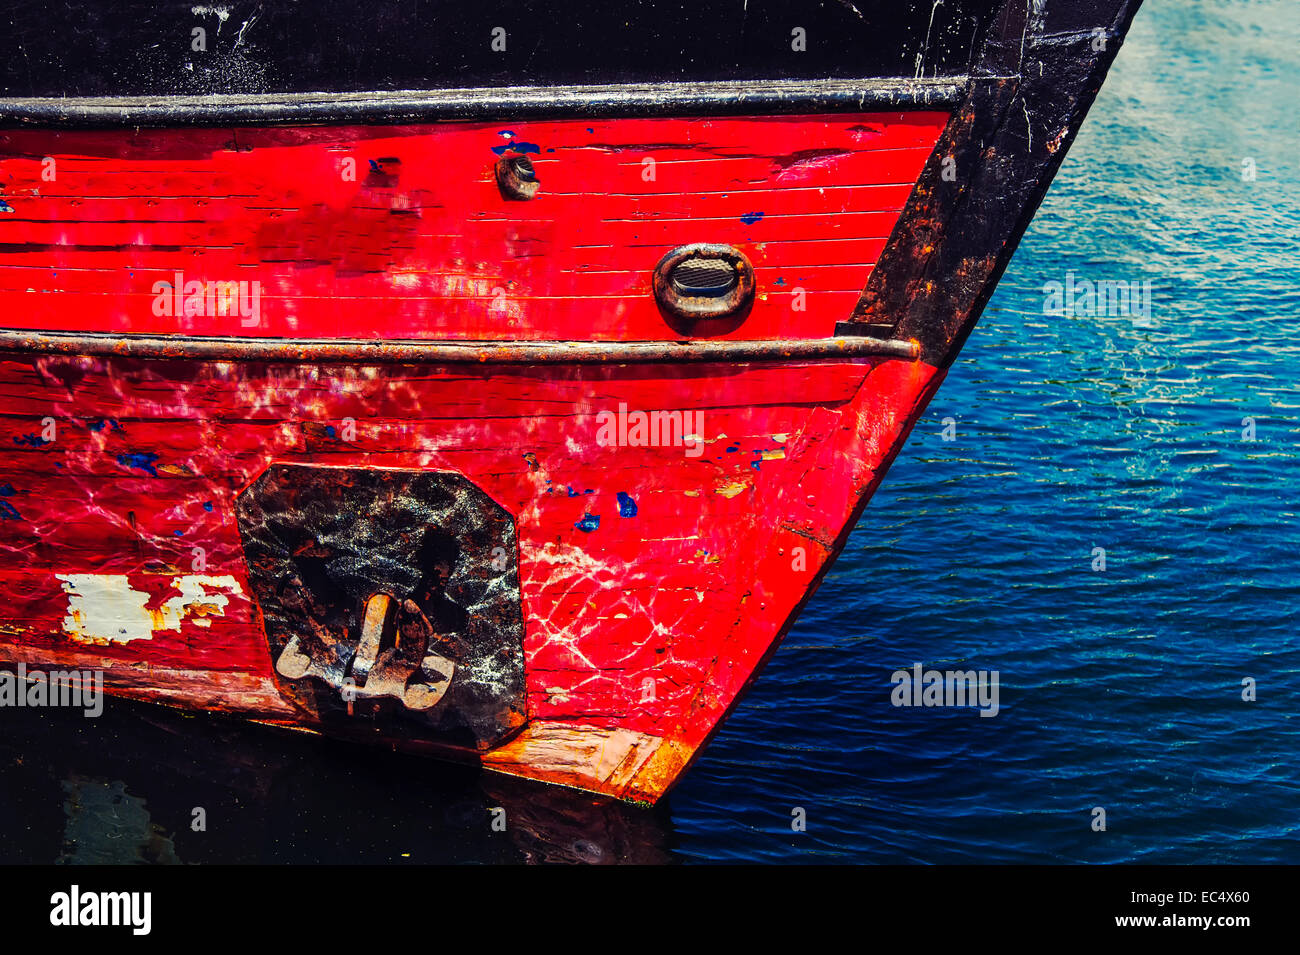 Prow of a ship s red against blue water Stock Photo